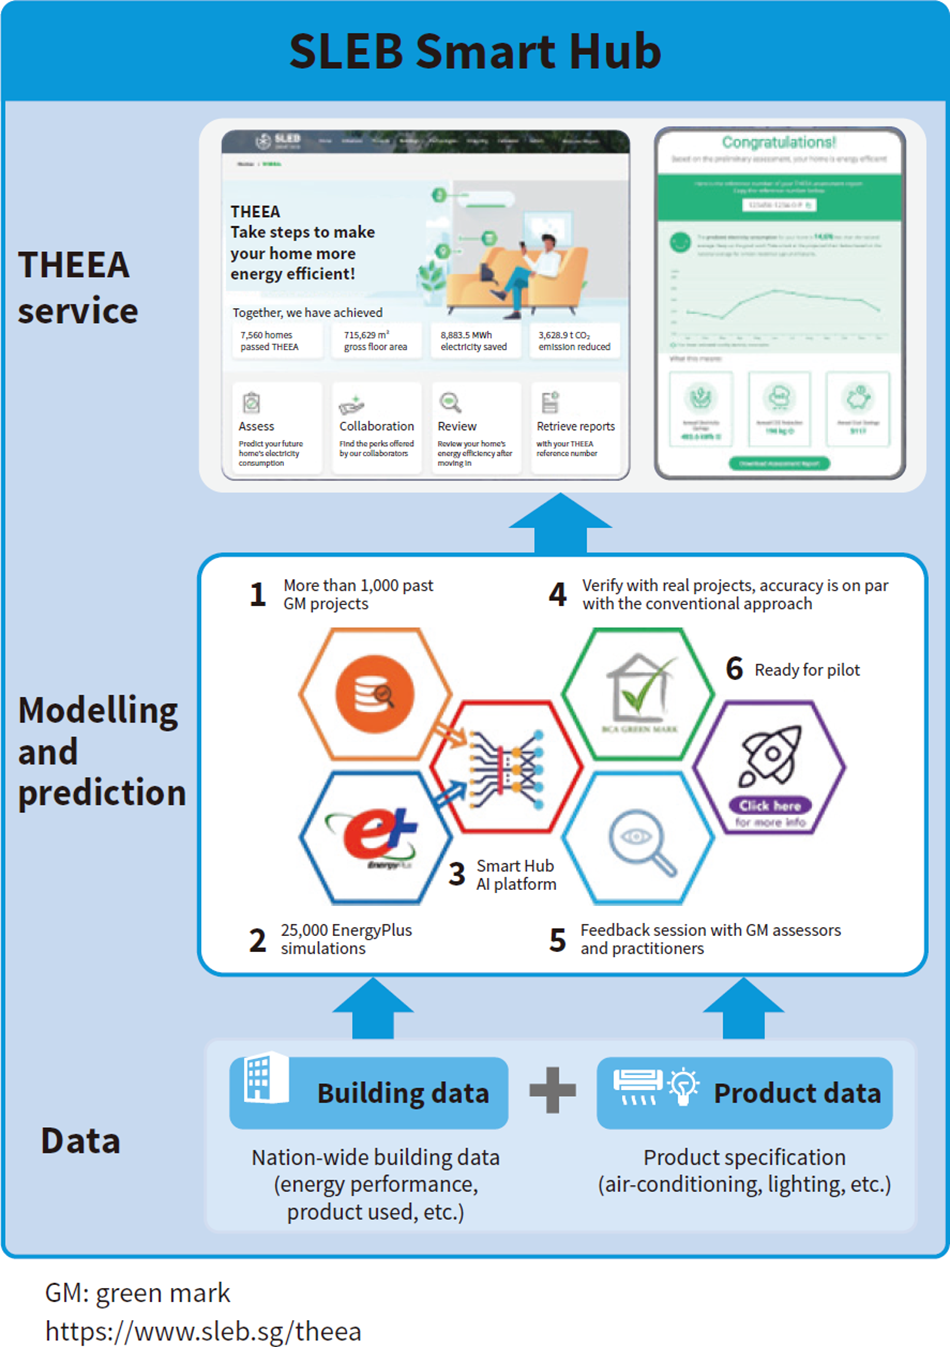 ［09］THEEA service provides energy performance assessment report for green loan application